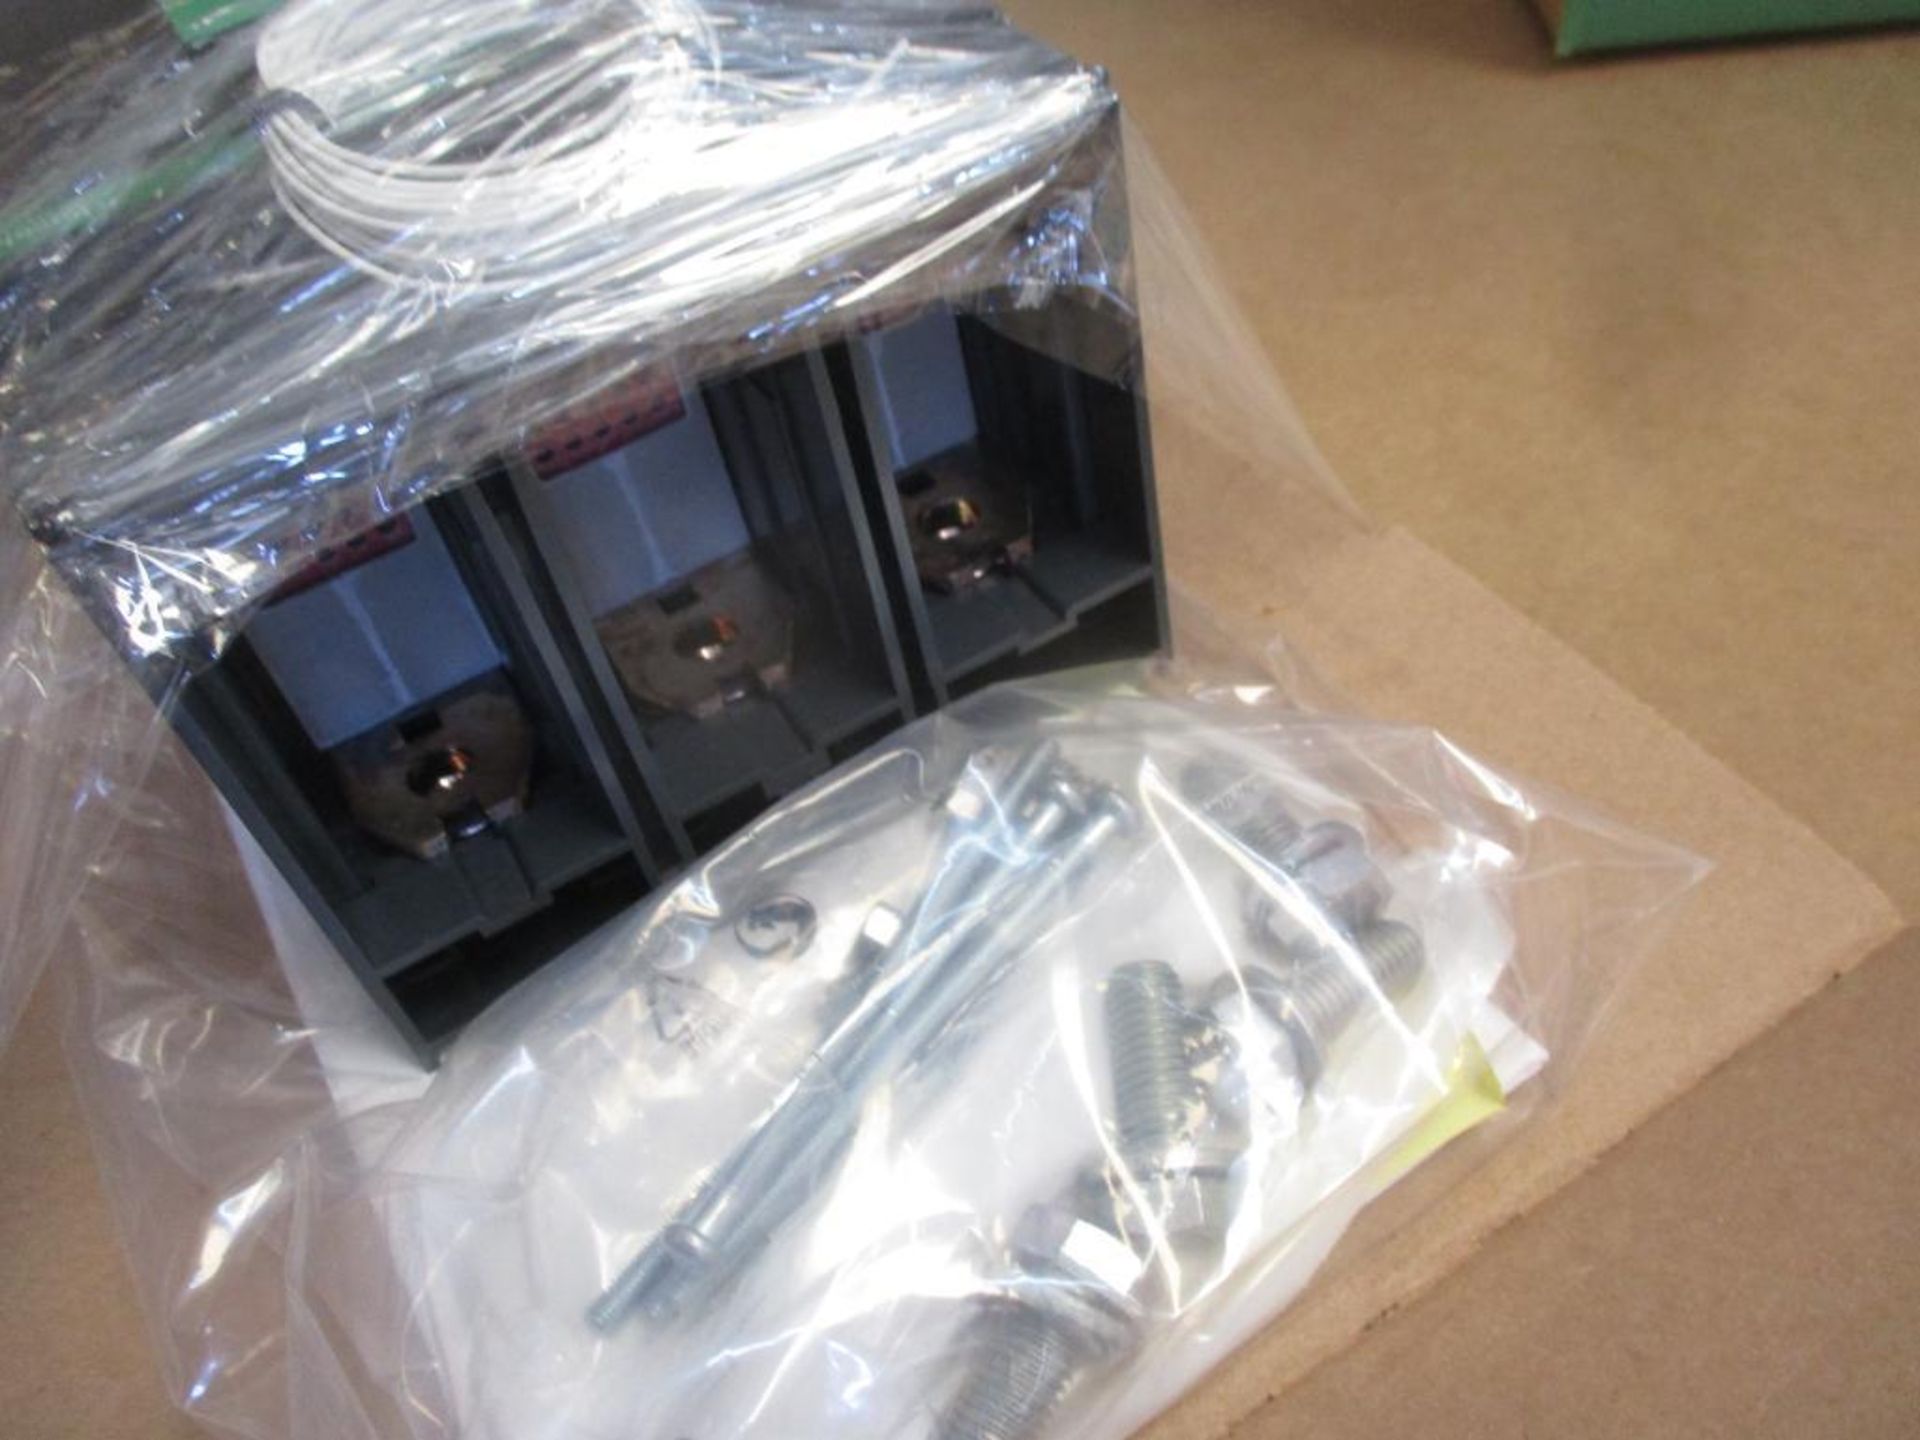 Square D 400 AMP Circuit Breaker, 556149P2, 3P, 400A, 600VAC, PowerPacT LG 400 (New in Box) - Image 3 of 4